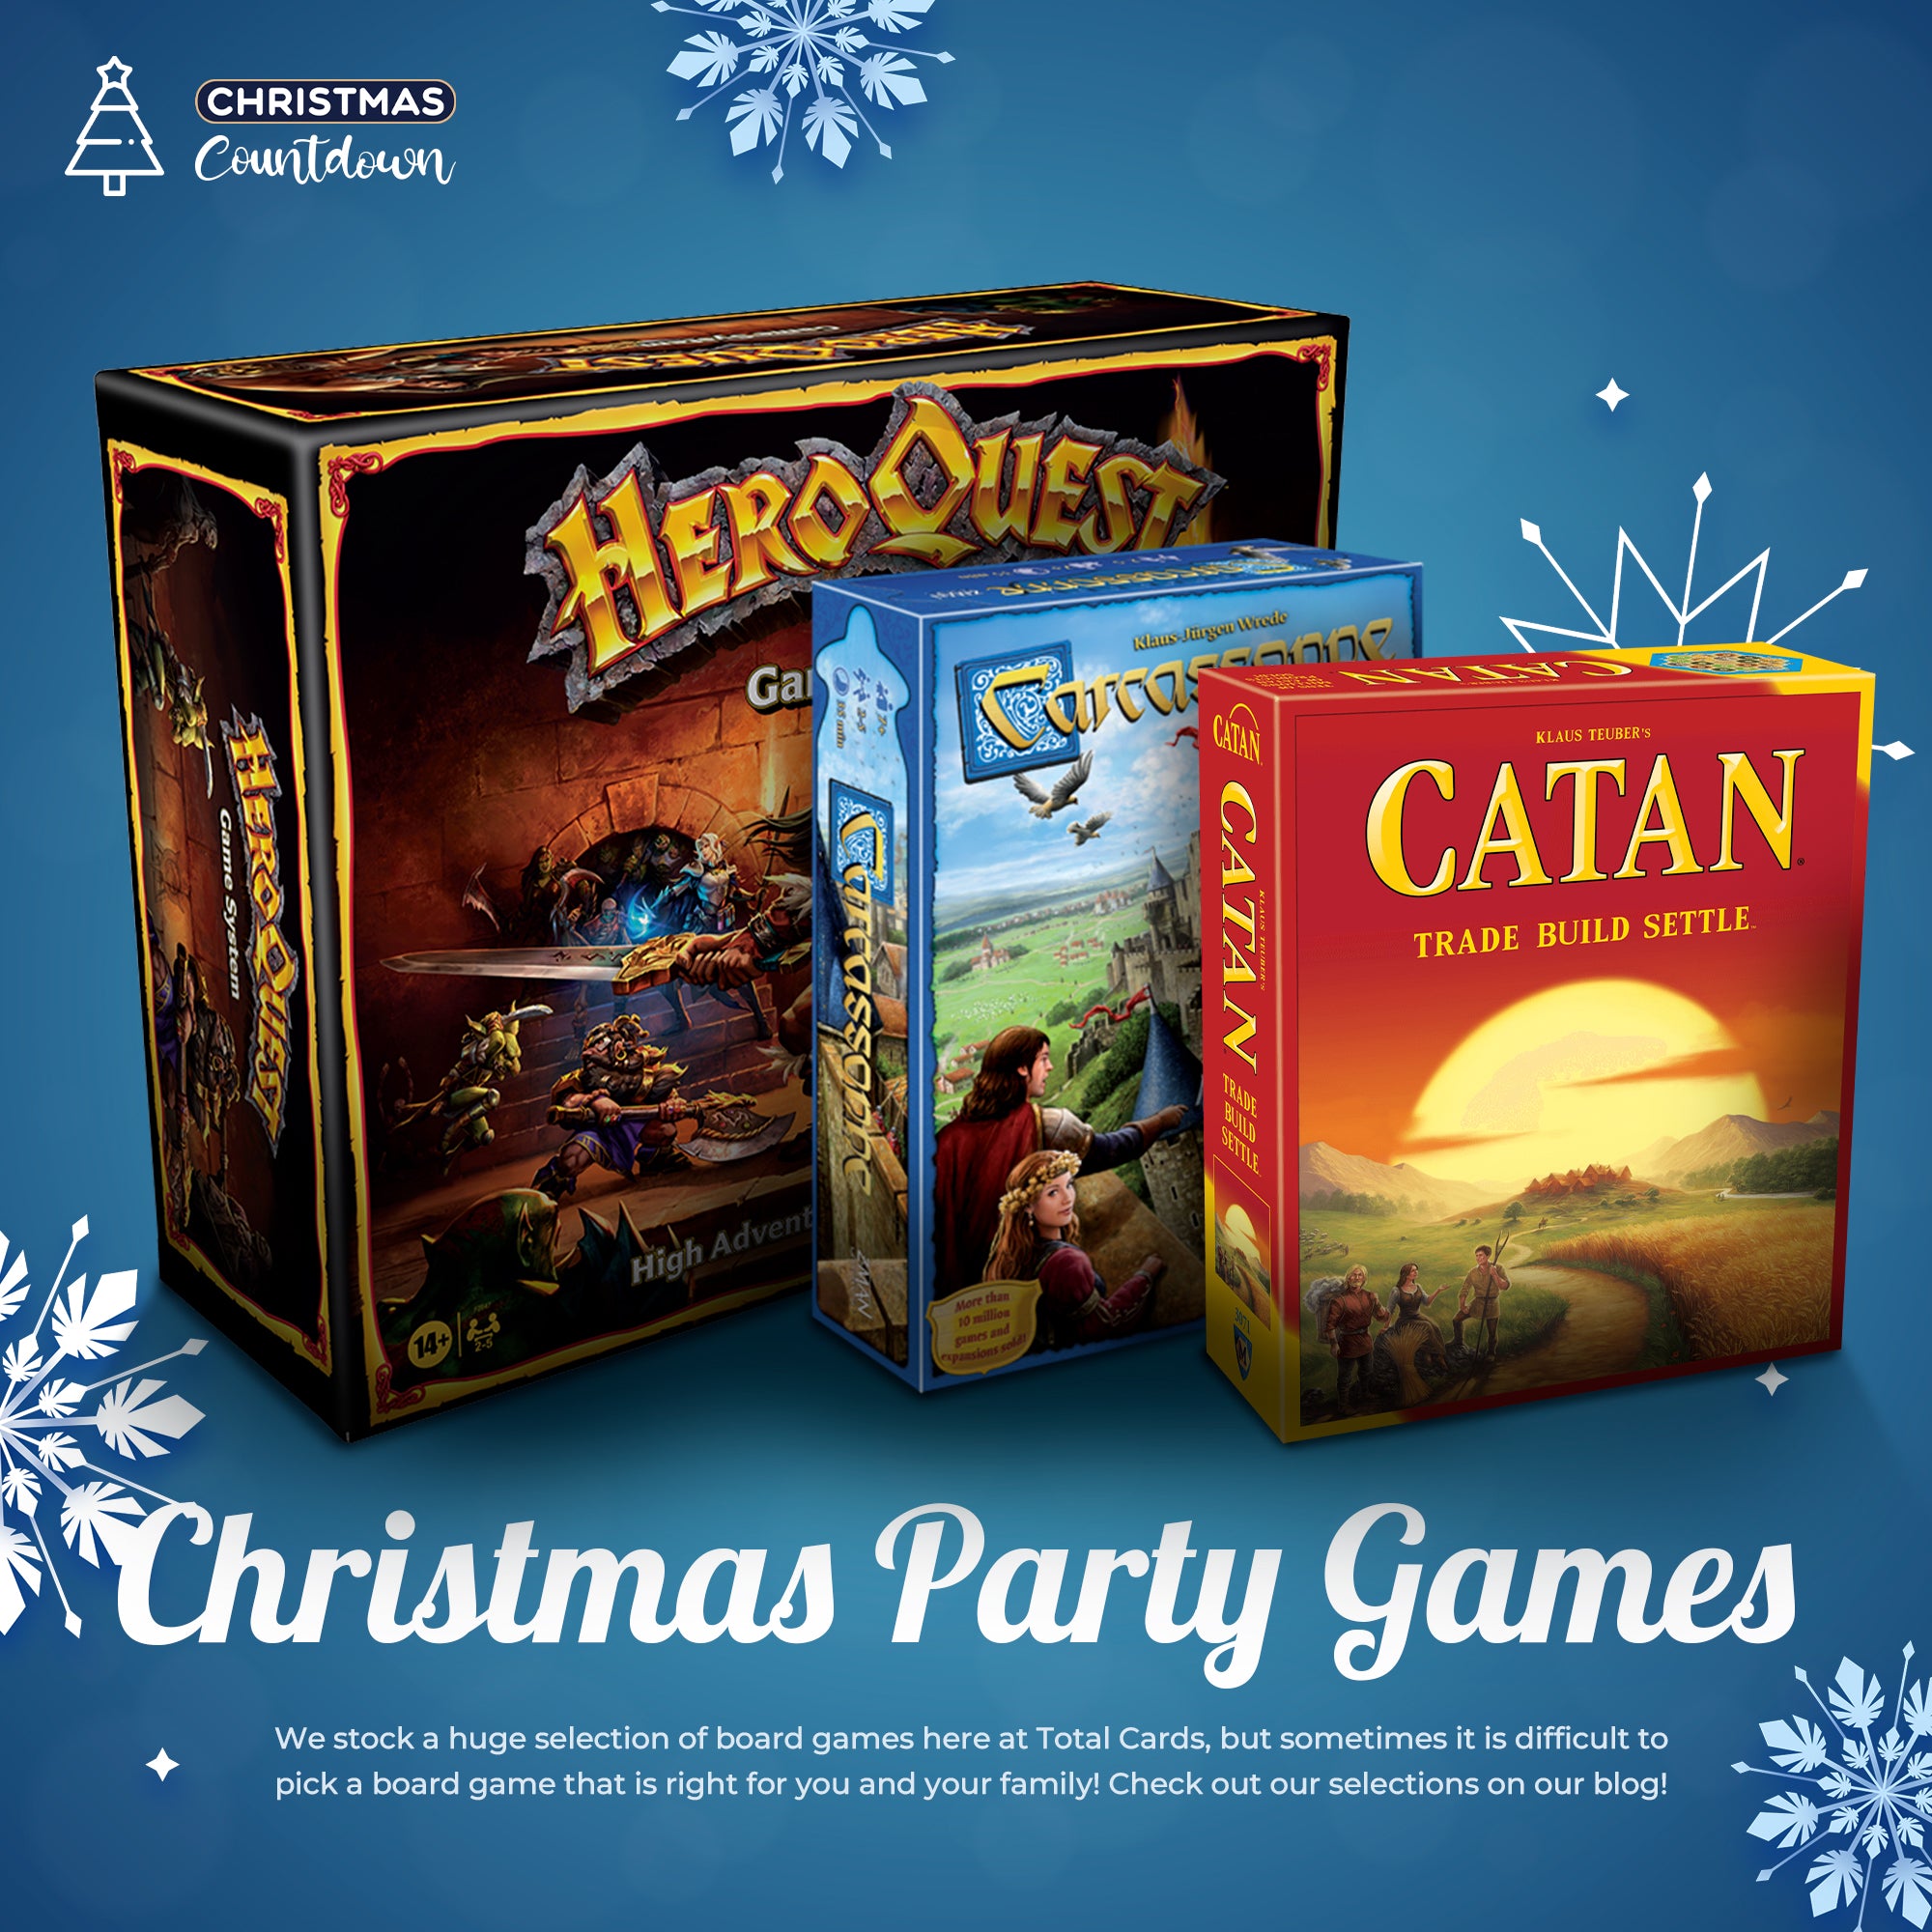 Christmas Party Games to Play with your family this holiday!